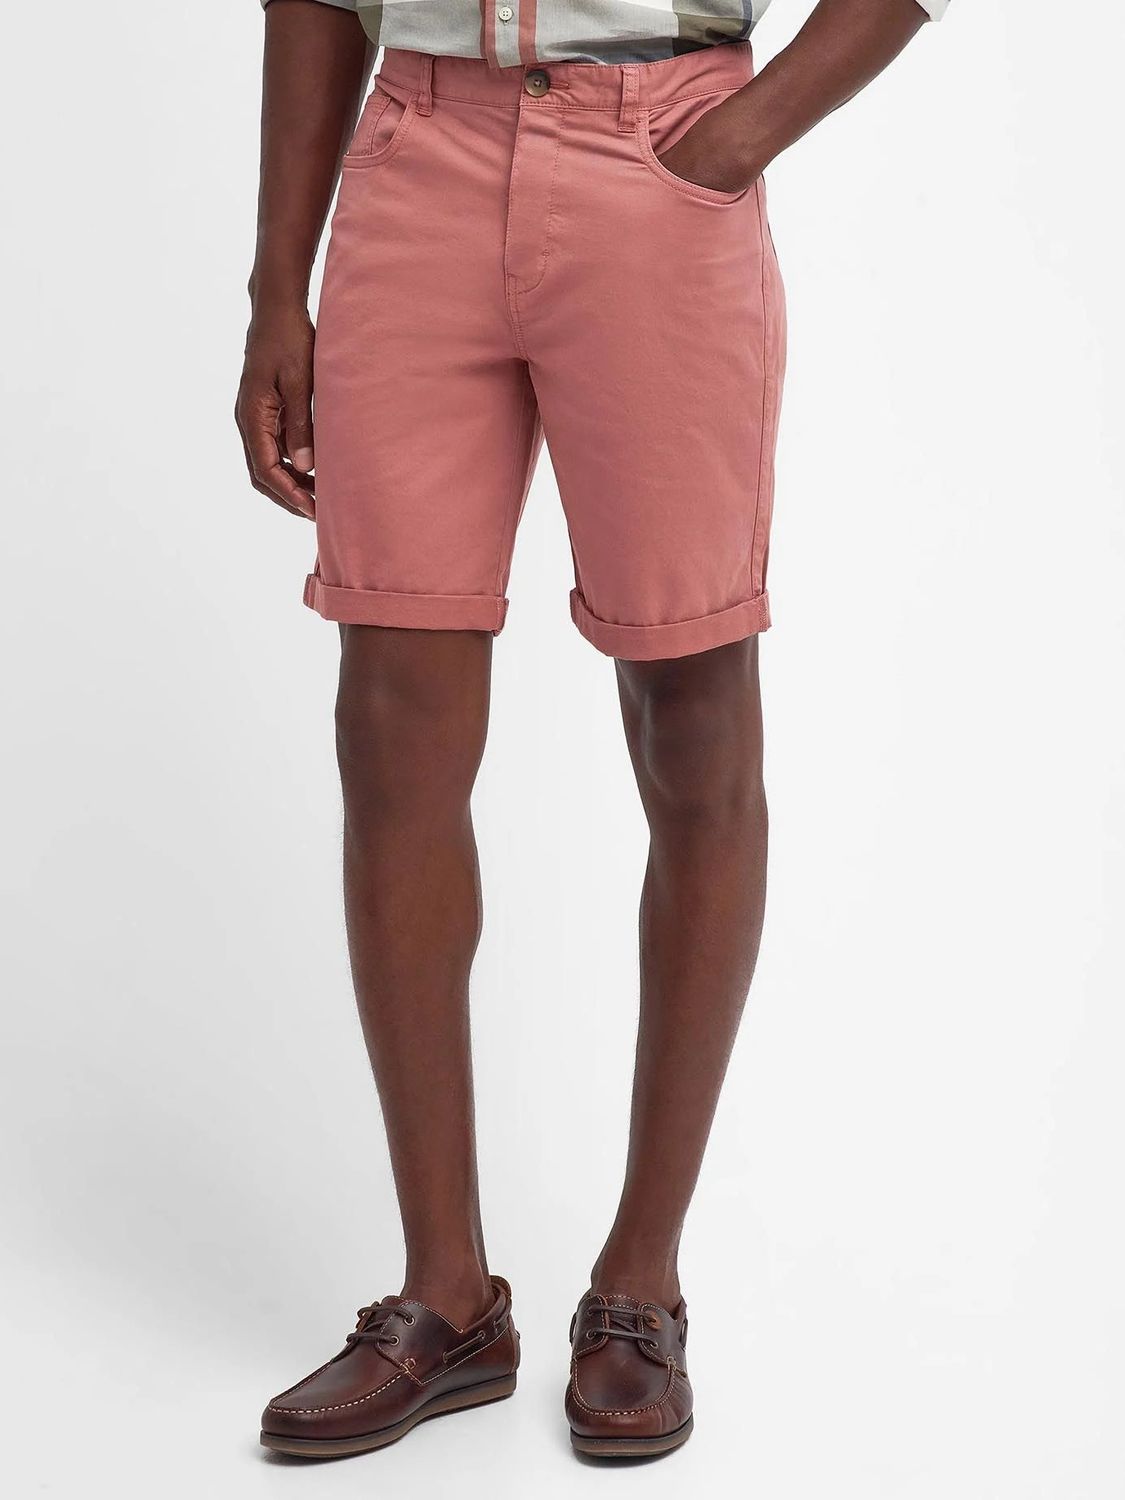 Barbour Overdyed Twill Shorts, Pink, 38R